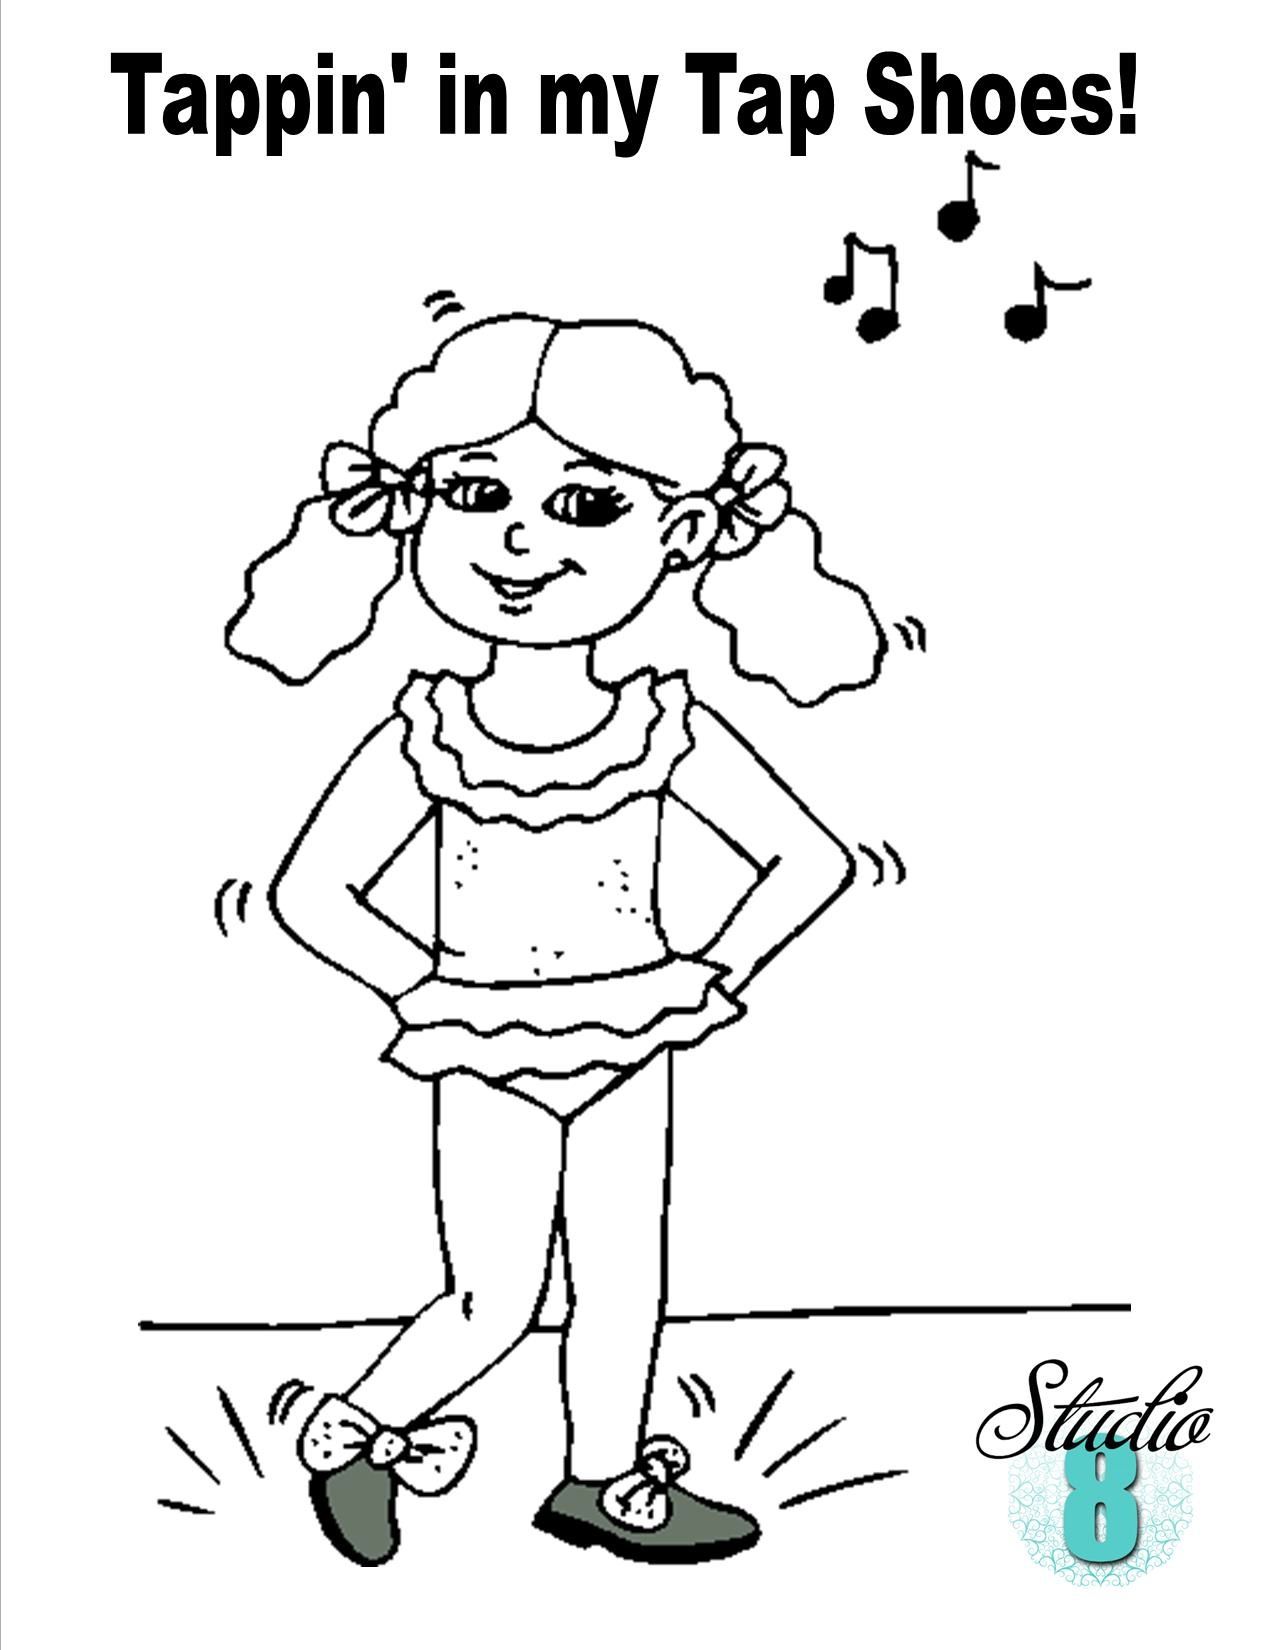 Dance Coloring Pages For Adults Irish Step Dancer Coloring Page ...